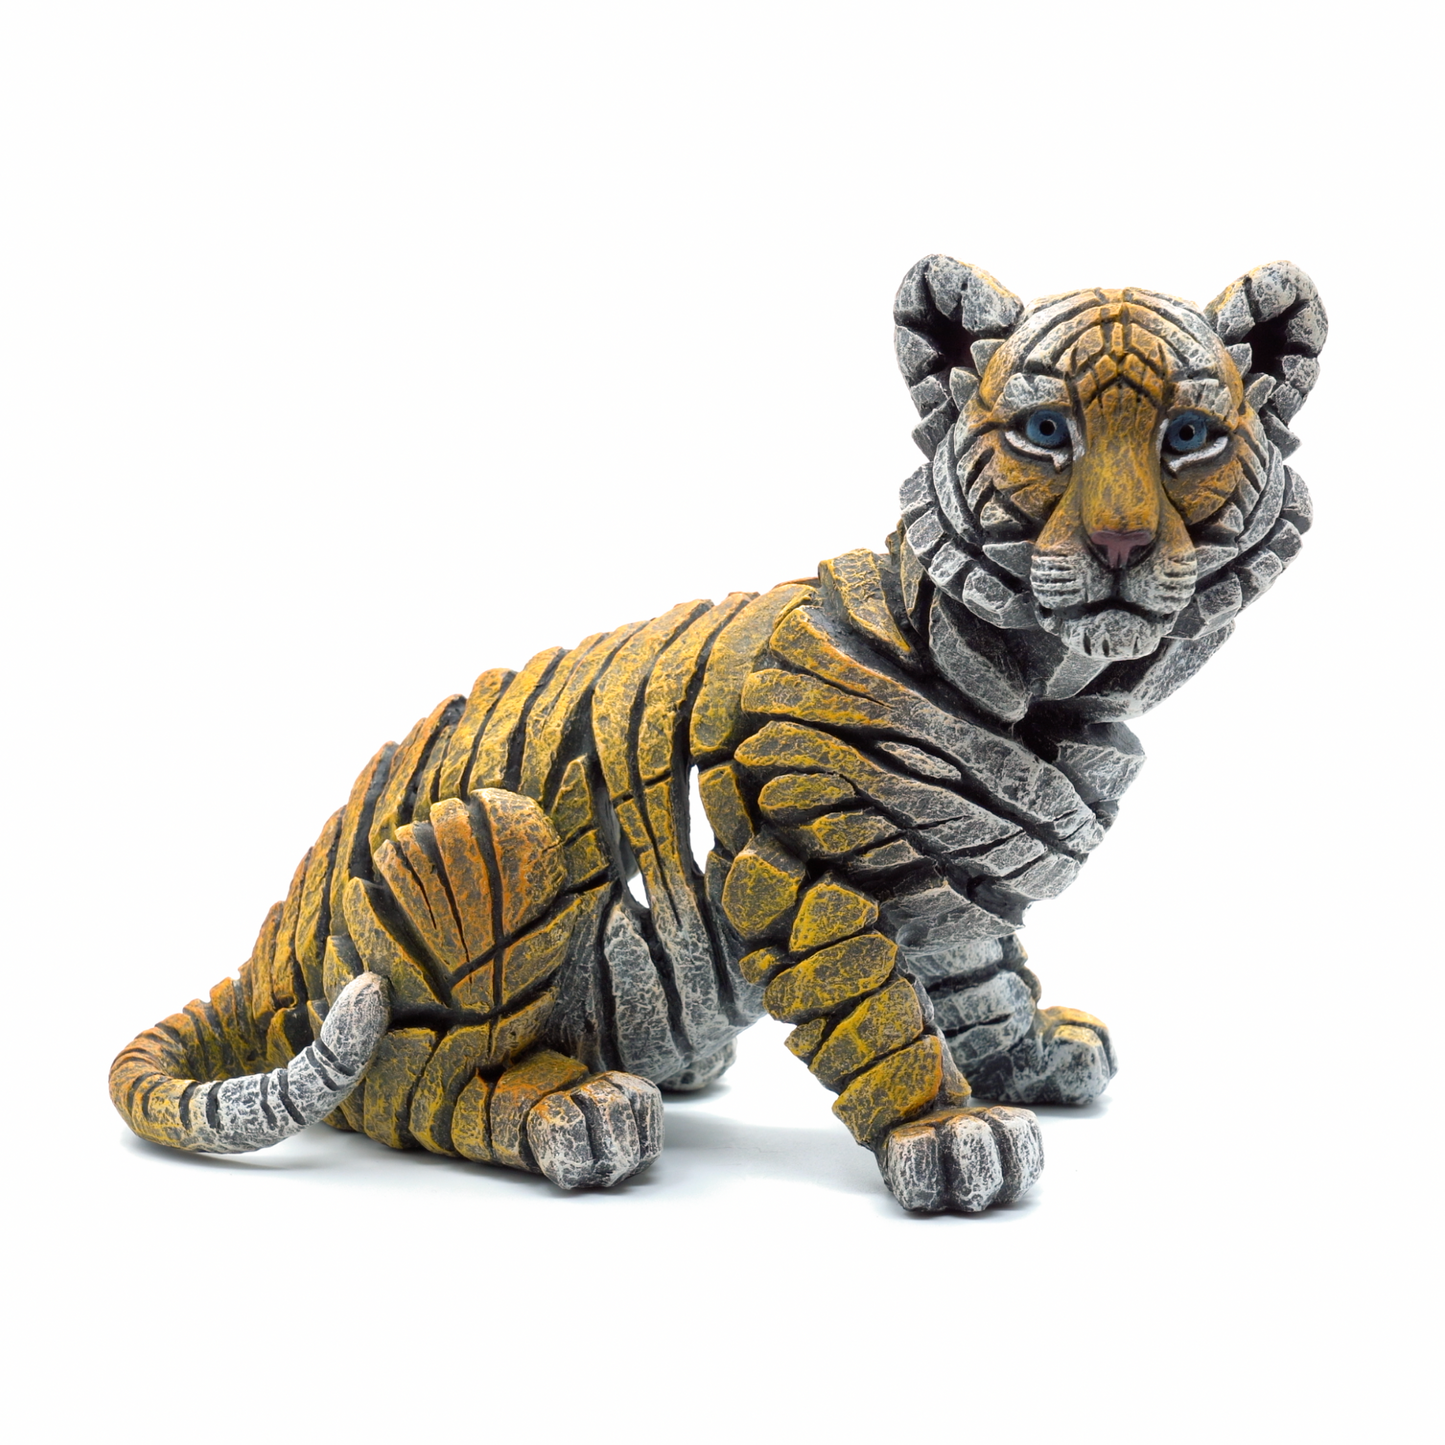 https://cdn.shopify.com/s/files/1/1452/4044/files/Tiger_Cub_Updated_by_Edge_Sculpture.mp4?4795